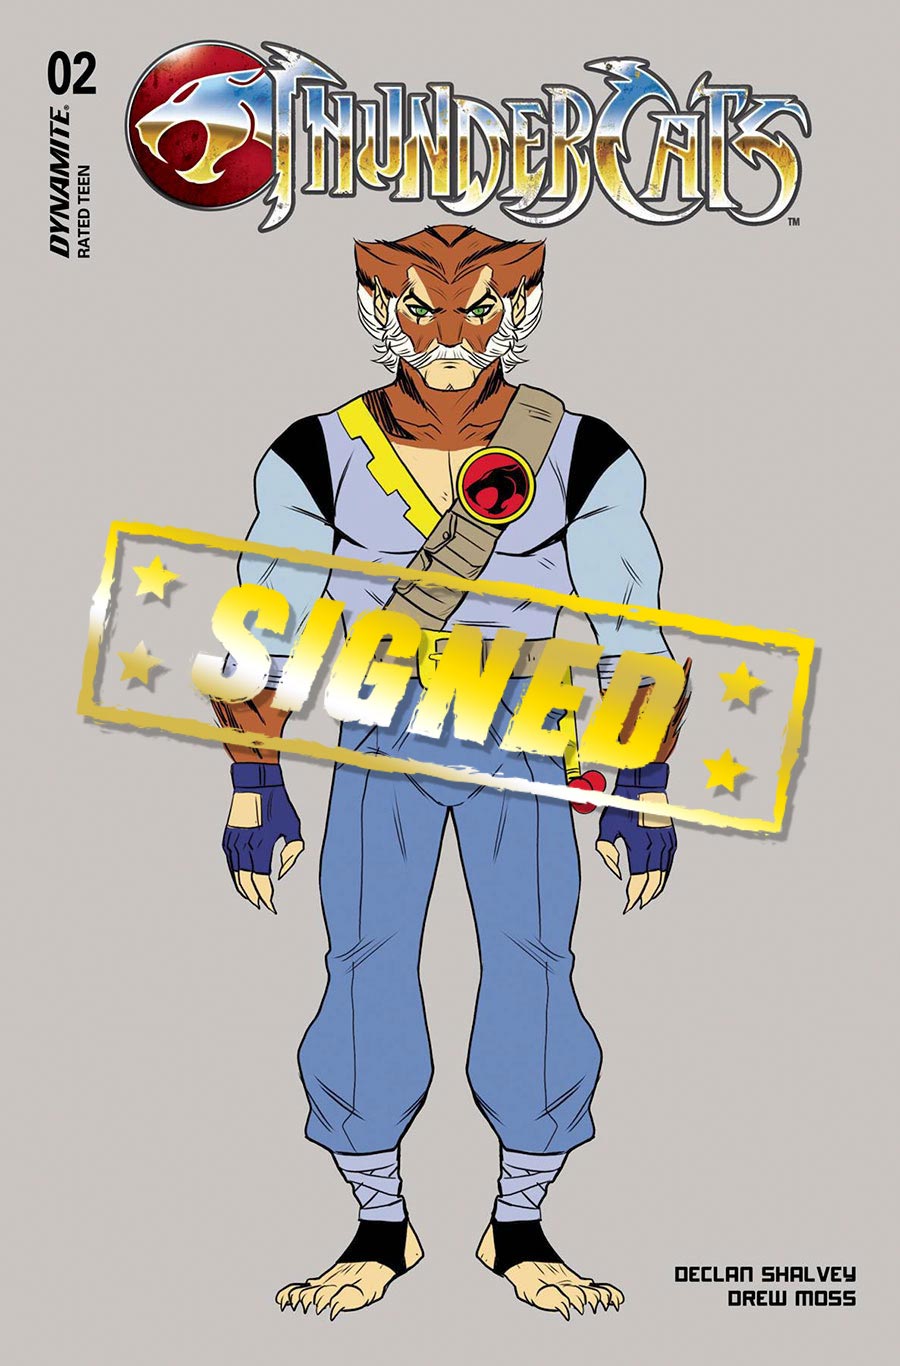 Thundercats Vol 3 #2 Cover Z-R Incentive Drew Moss Original Tygra Character Design Variant Cover Signed By Declan Shalvey